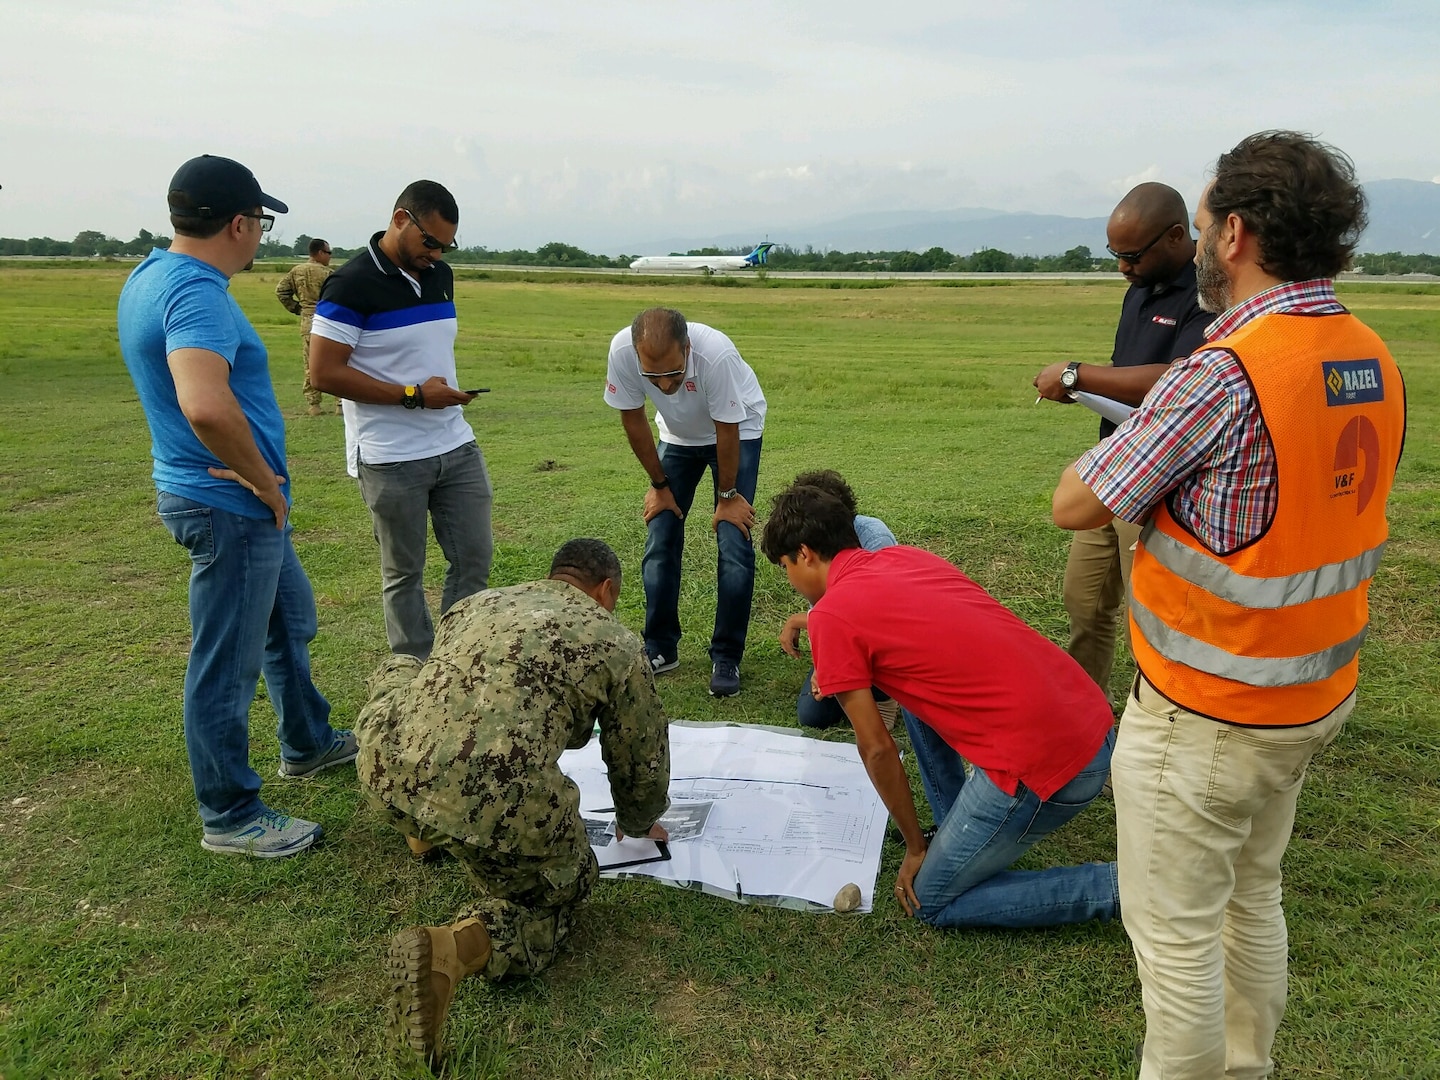 An engineer from the U.S. Naval Construction Forces "Seebees" (center, in fatigues) and personnel from a DLA Troop Support contractor review plans for a helicopter pad at Toussaint L'Ouverture International Airport, Port au Prince, Haiti, October 2016.